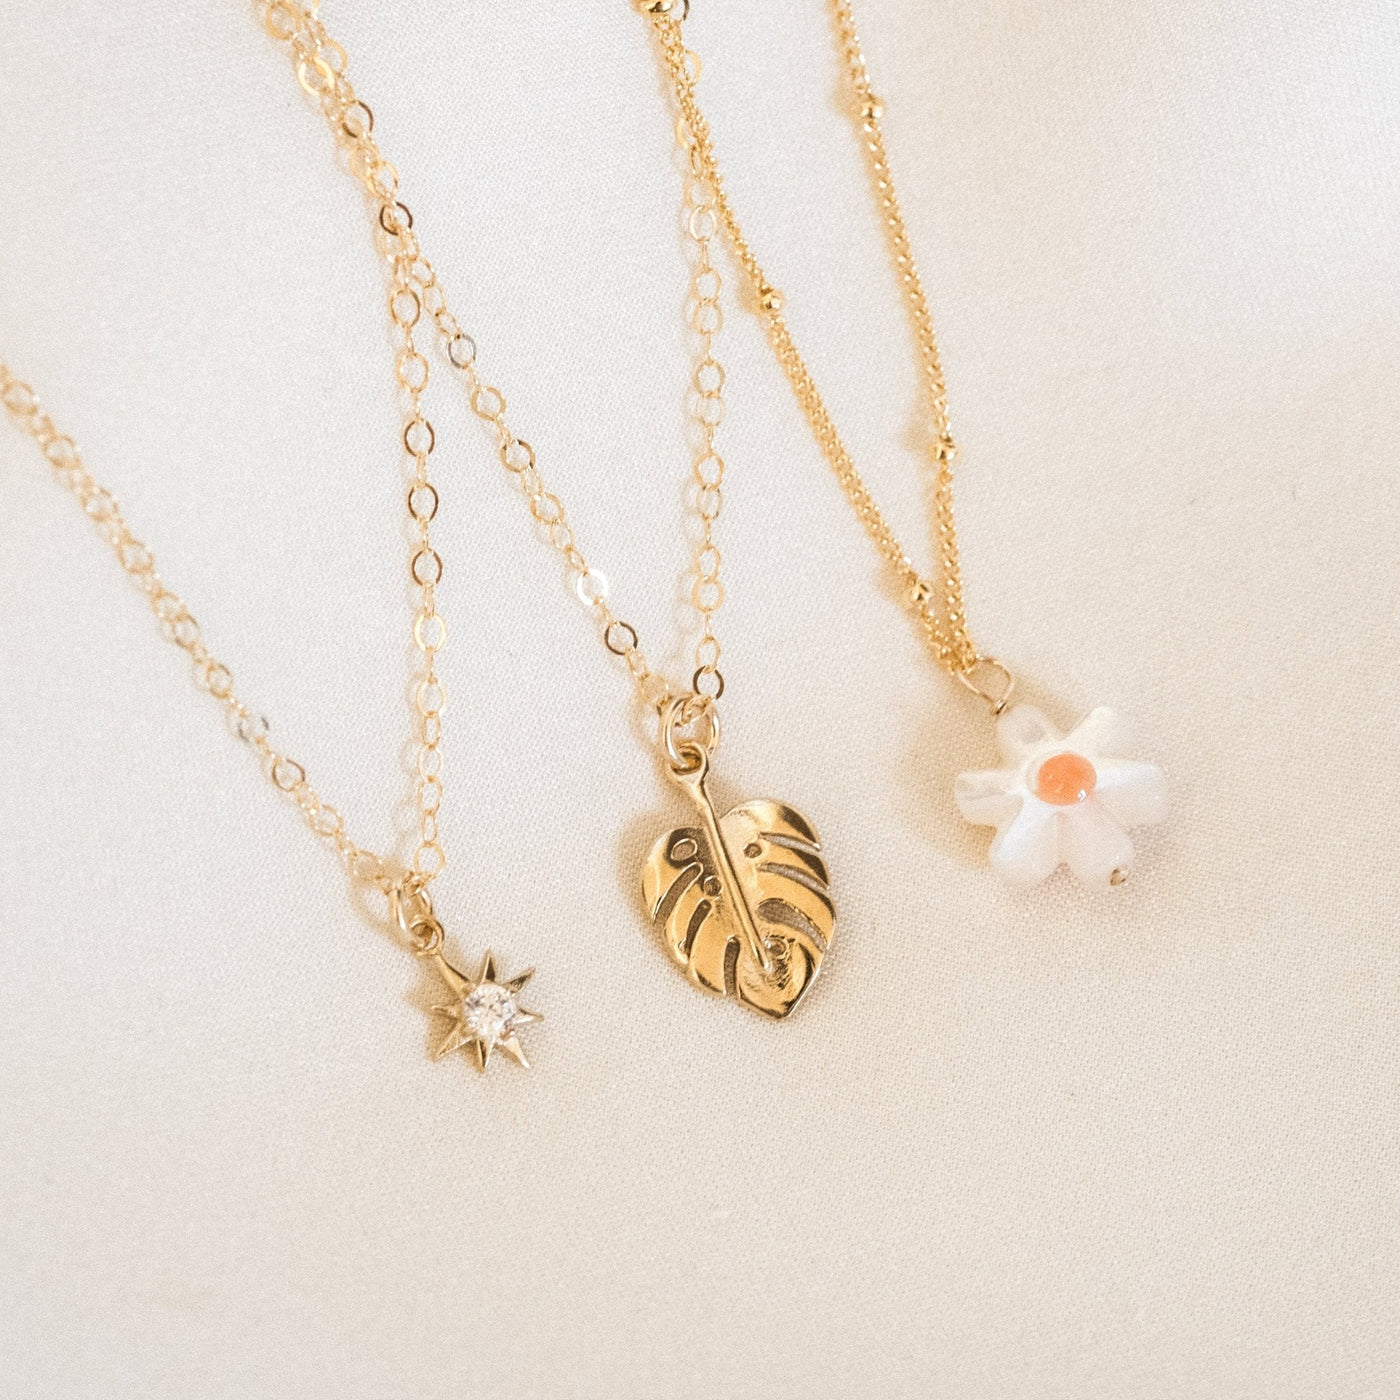 Starburst Necklace | Simple & Dainty